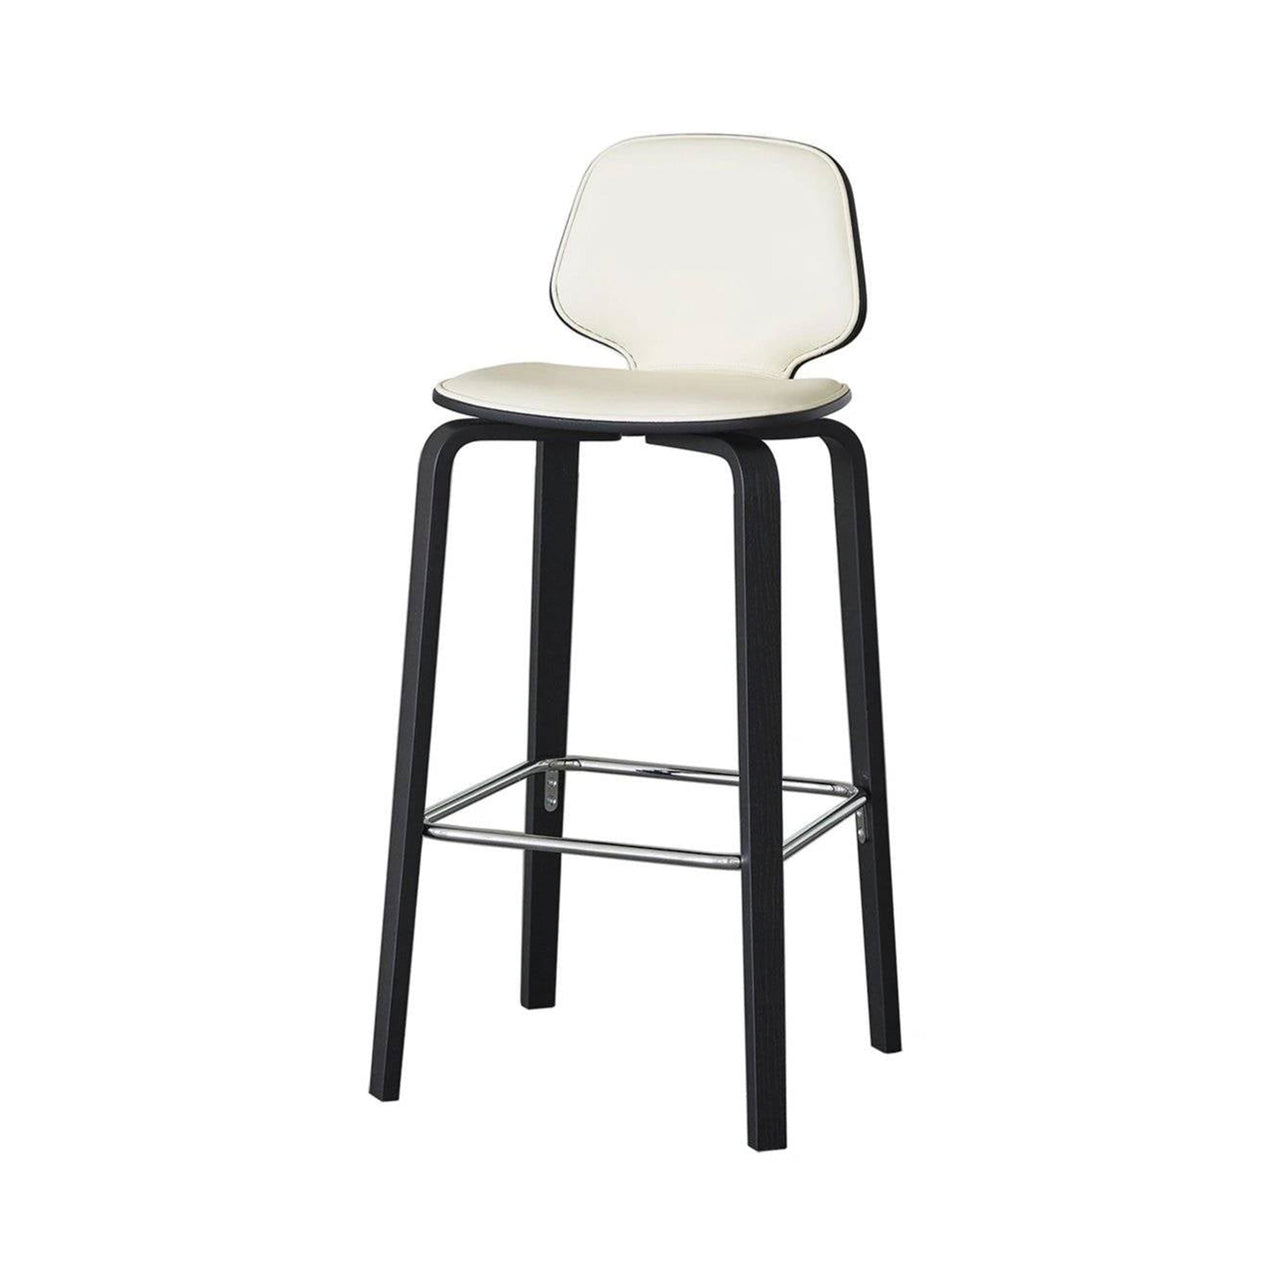 My Chair Bar + Counter Stool: Wood Base + Front Upholstered + Bar + Black